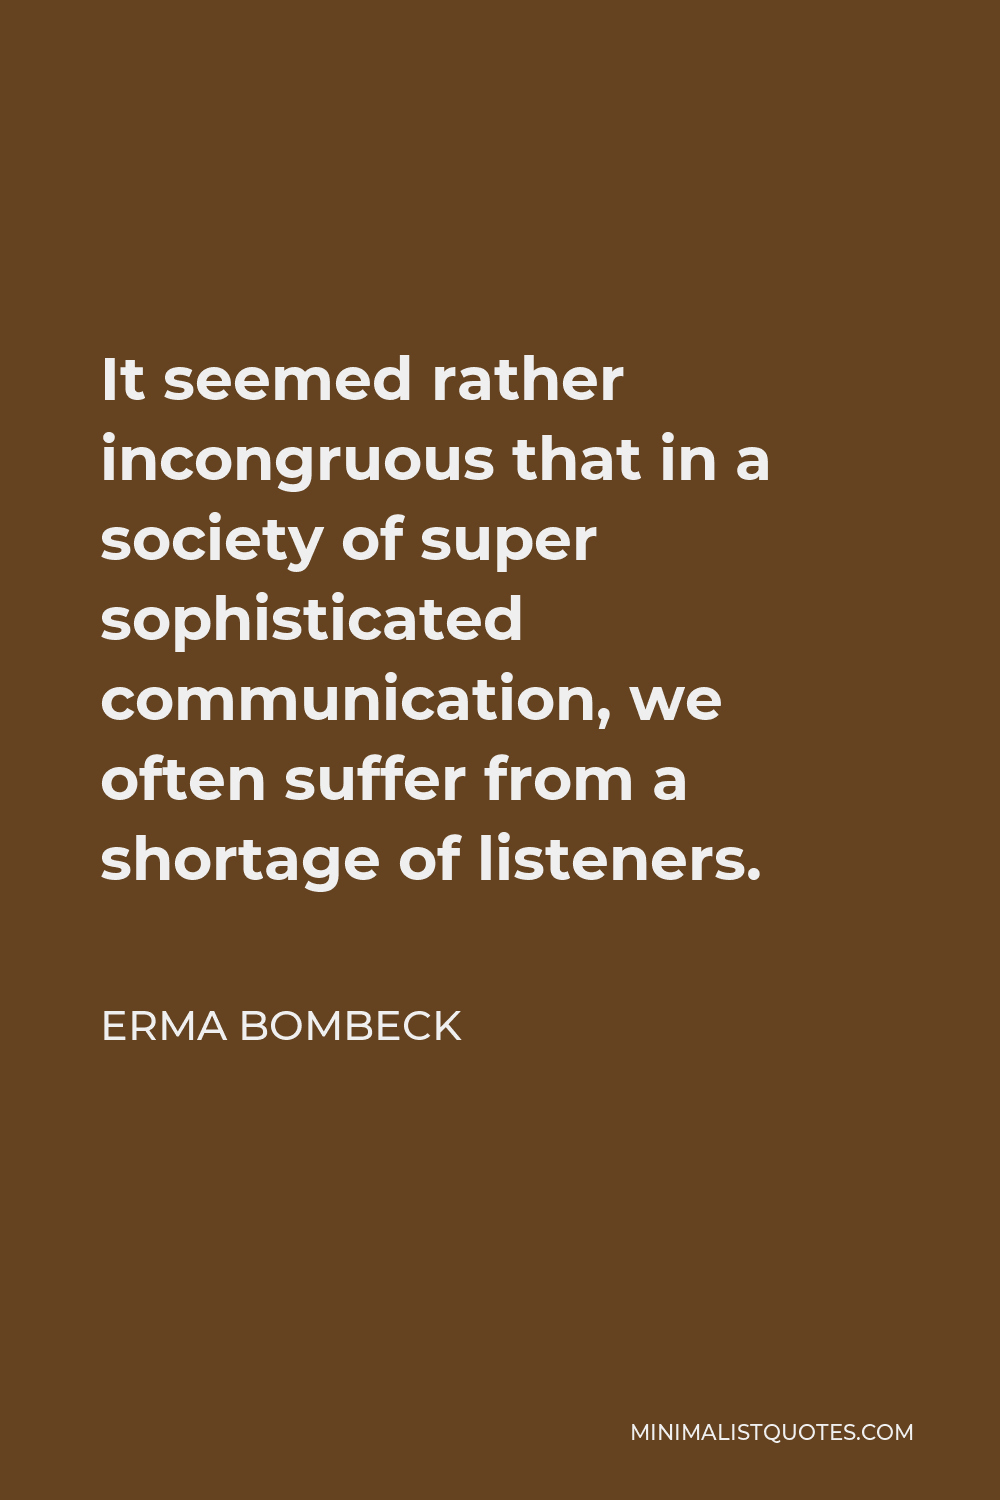 Erma Bombeck Quote - It seemed rather incongruous that in a society of super sophisticated communication, we often suffer from a shortage of listeners.